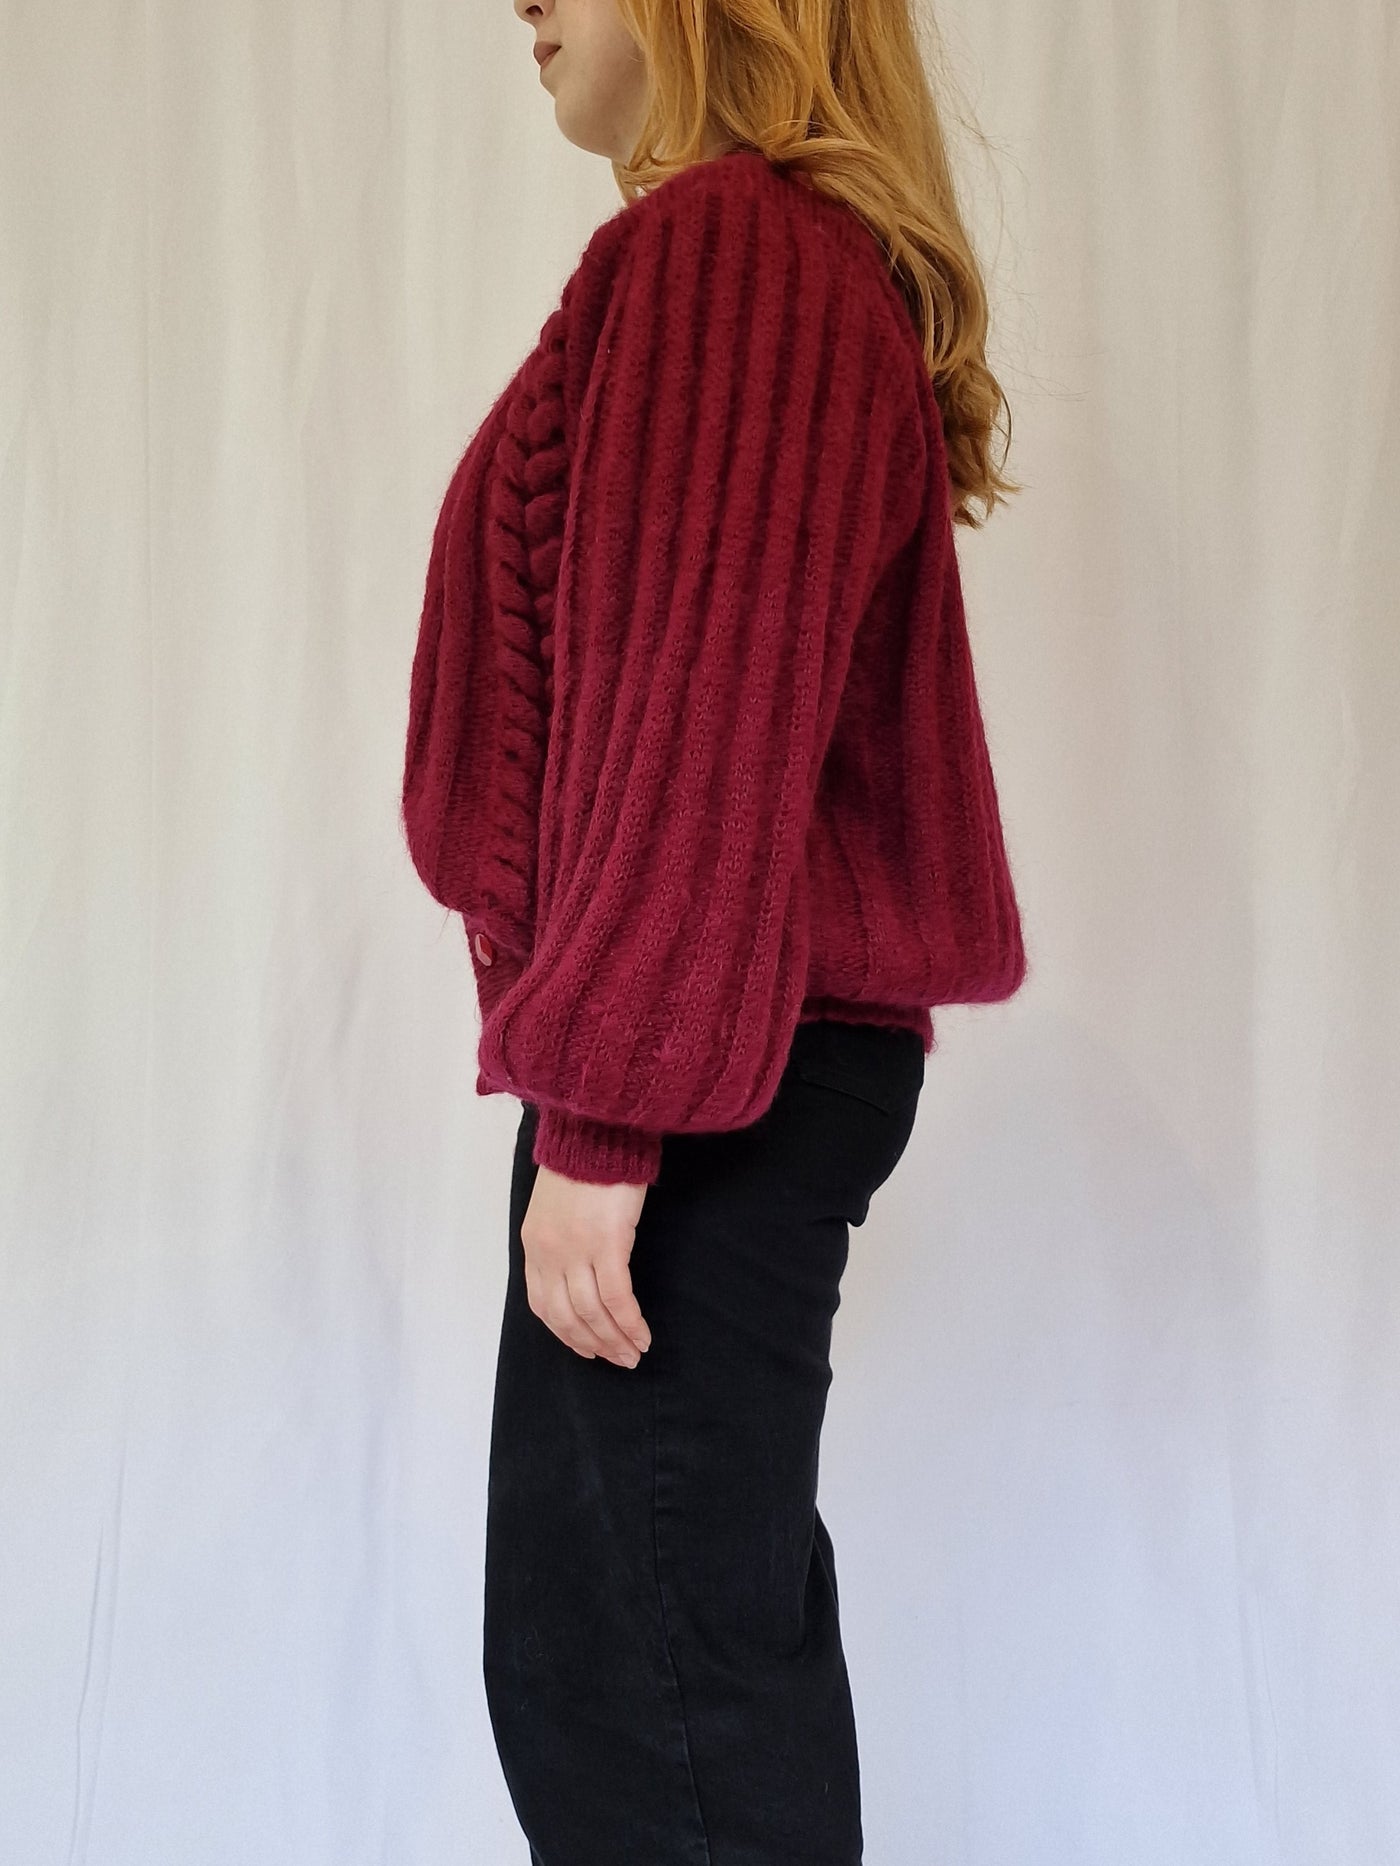 Vintage 80s Burgundy Red Knitted Crew Neck Mohair Cardigan - M/L